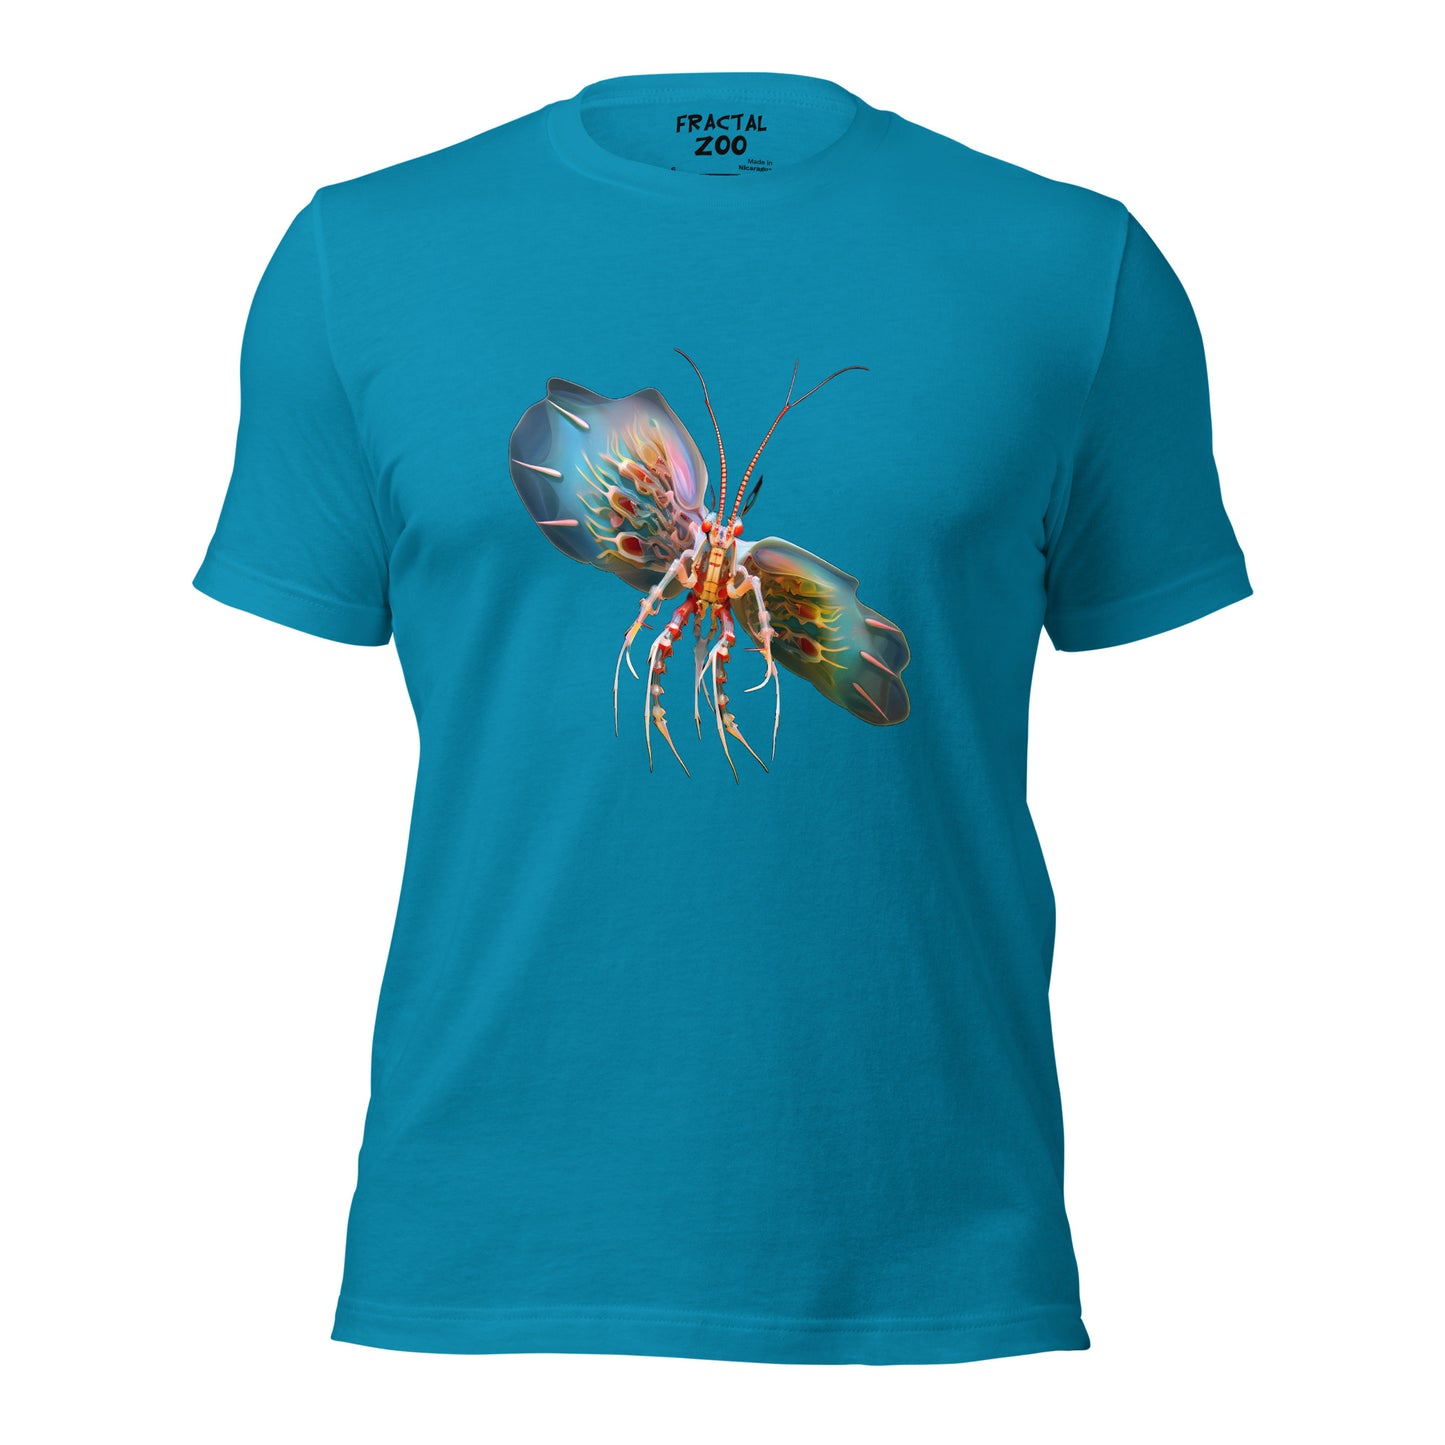 Fly into the Surreal with the Flying Fractal Mantis T-Shirt where Art meets Nature